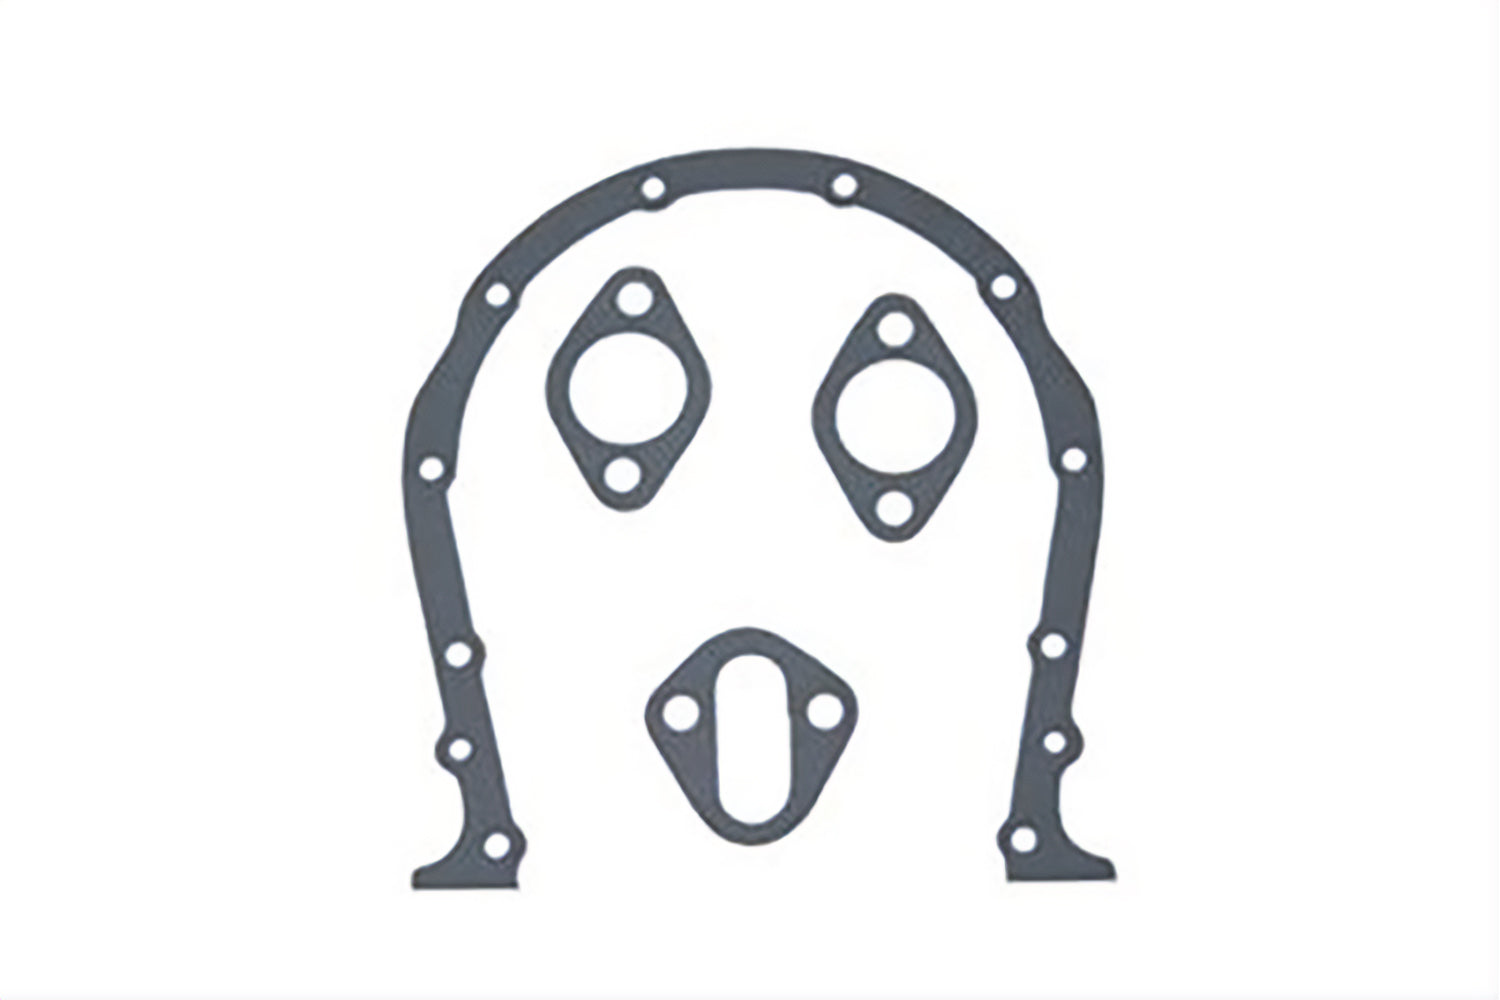 SCE Gaskets Accu-Seal E 1965-90 Chevy 396-454 Big Block Mark IV Front Cover Gasket Set - 11300